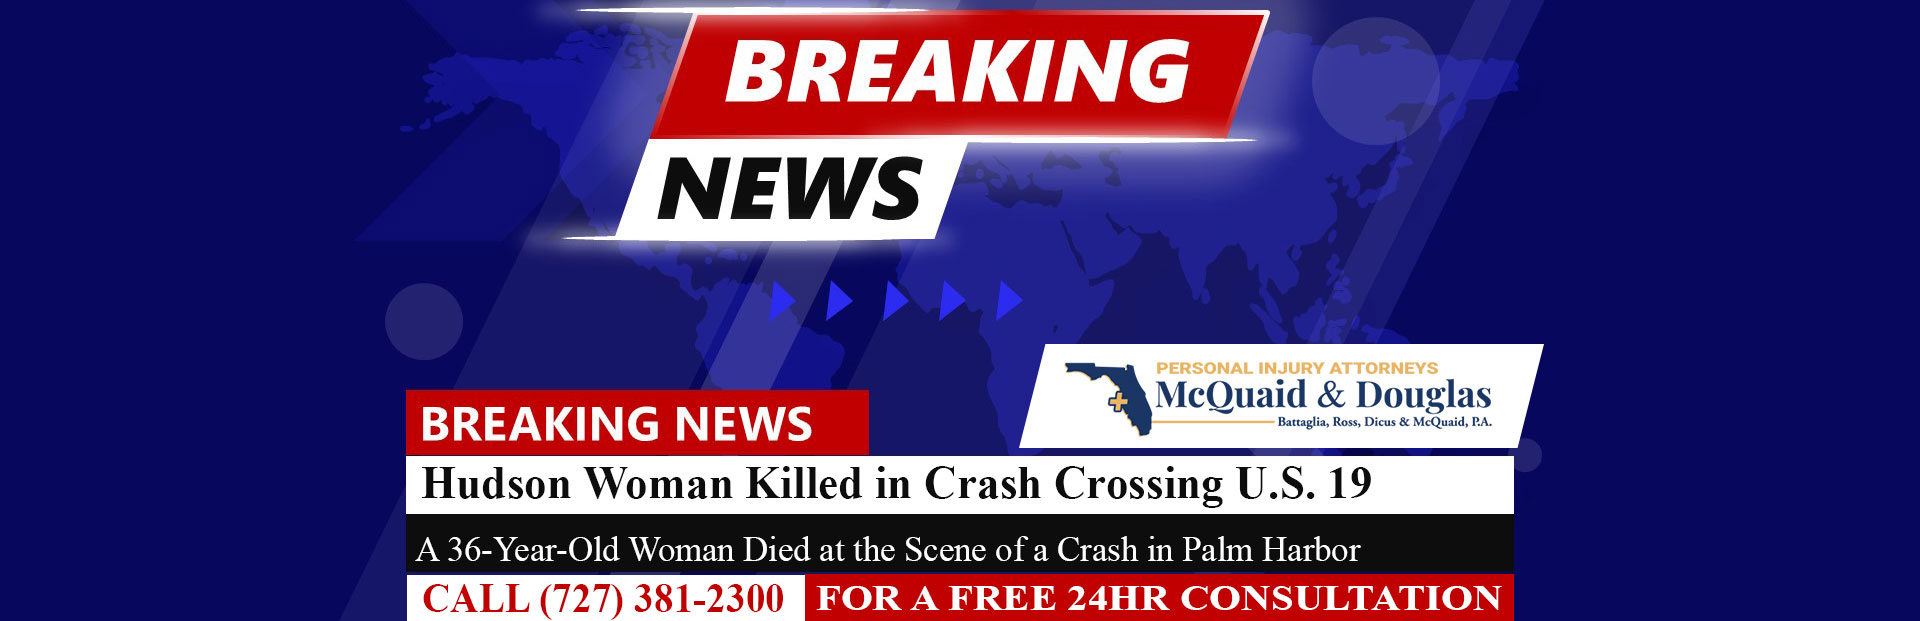 [6-9-22] FHP: Hudson Woman Killed in Crash After Attempting to Cross U.S. 19 From Median